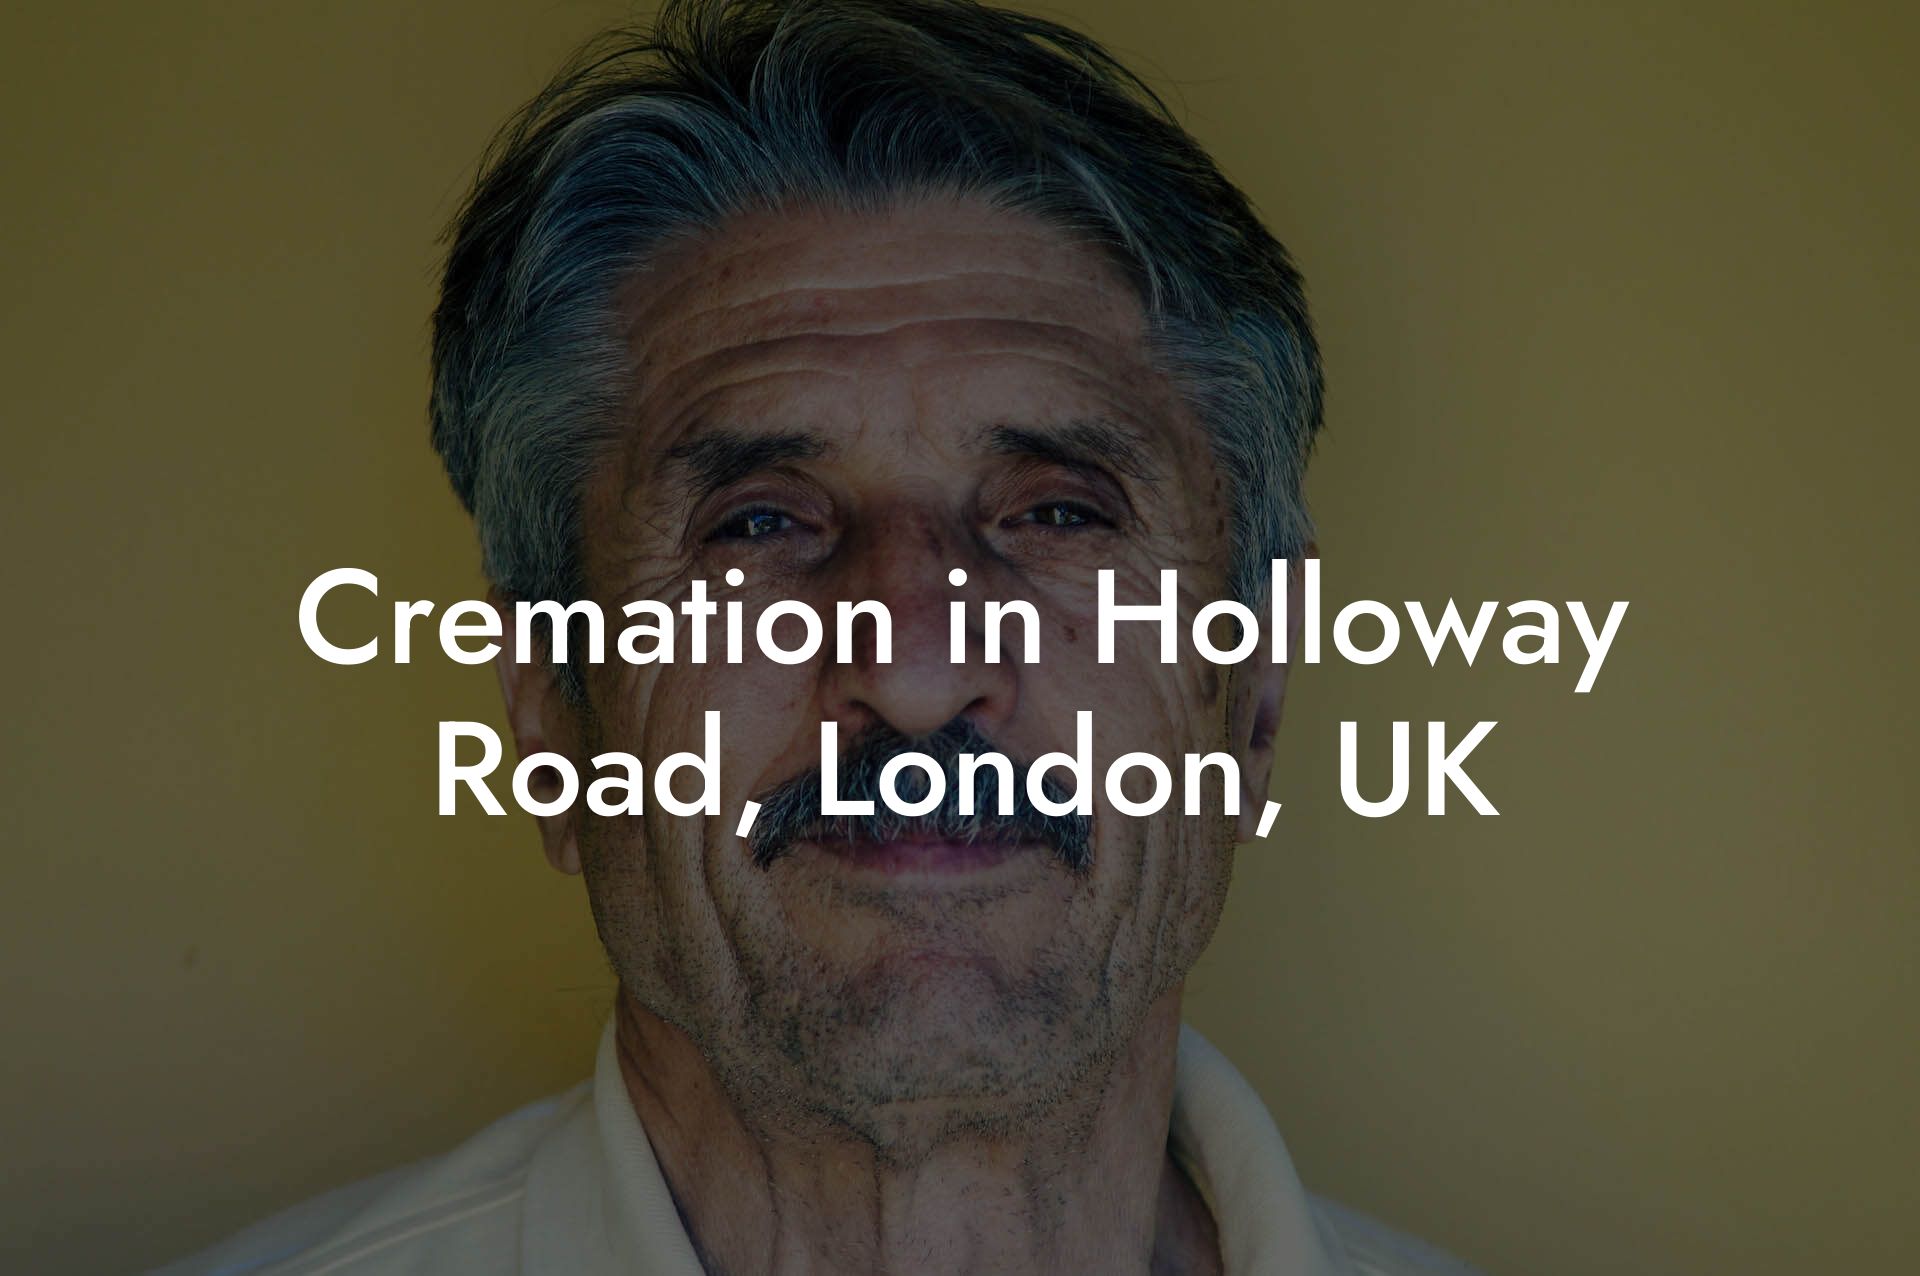 Cremation in Holloway Road, London, UK